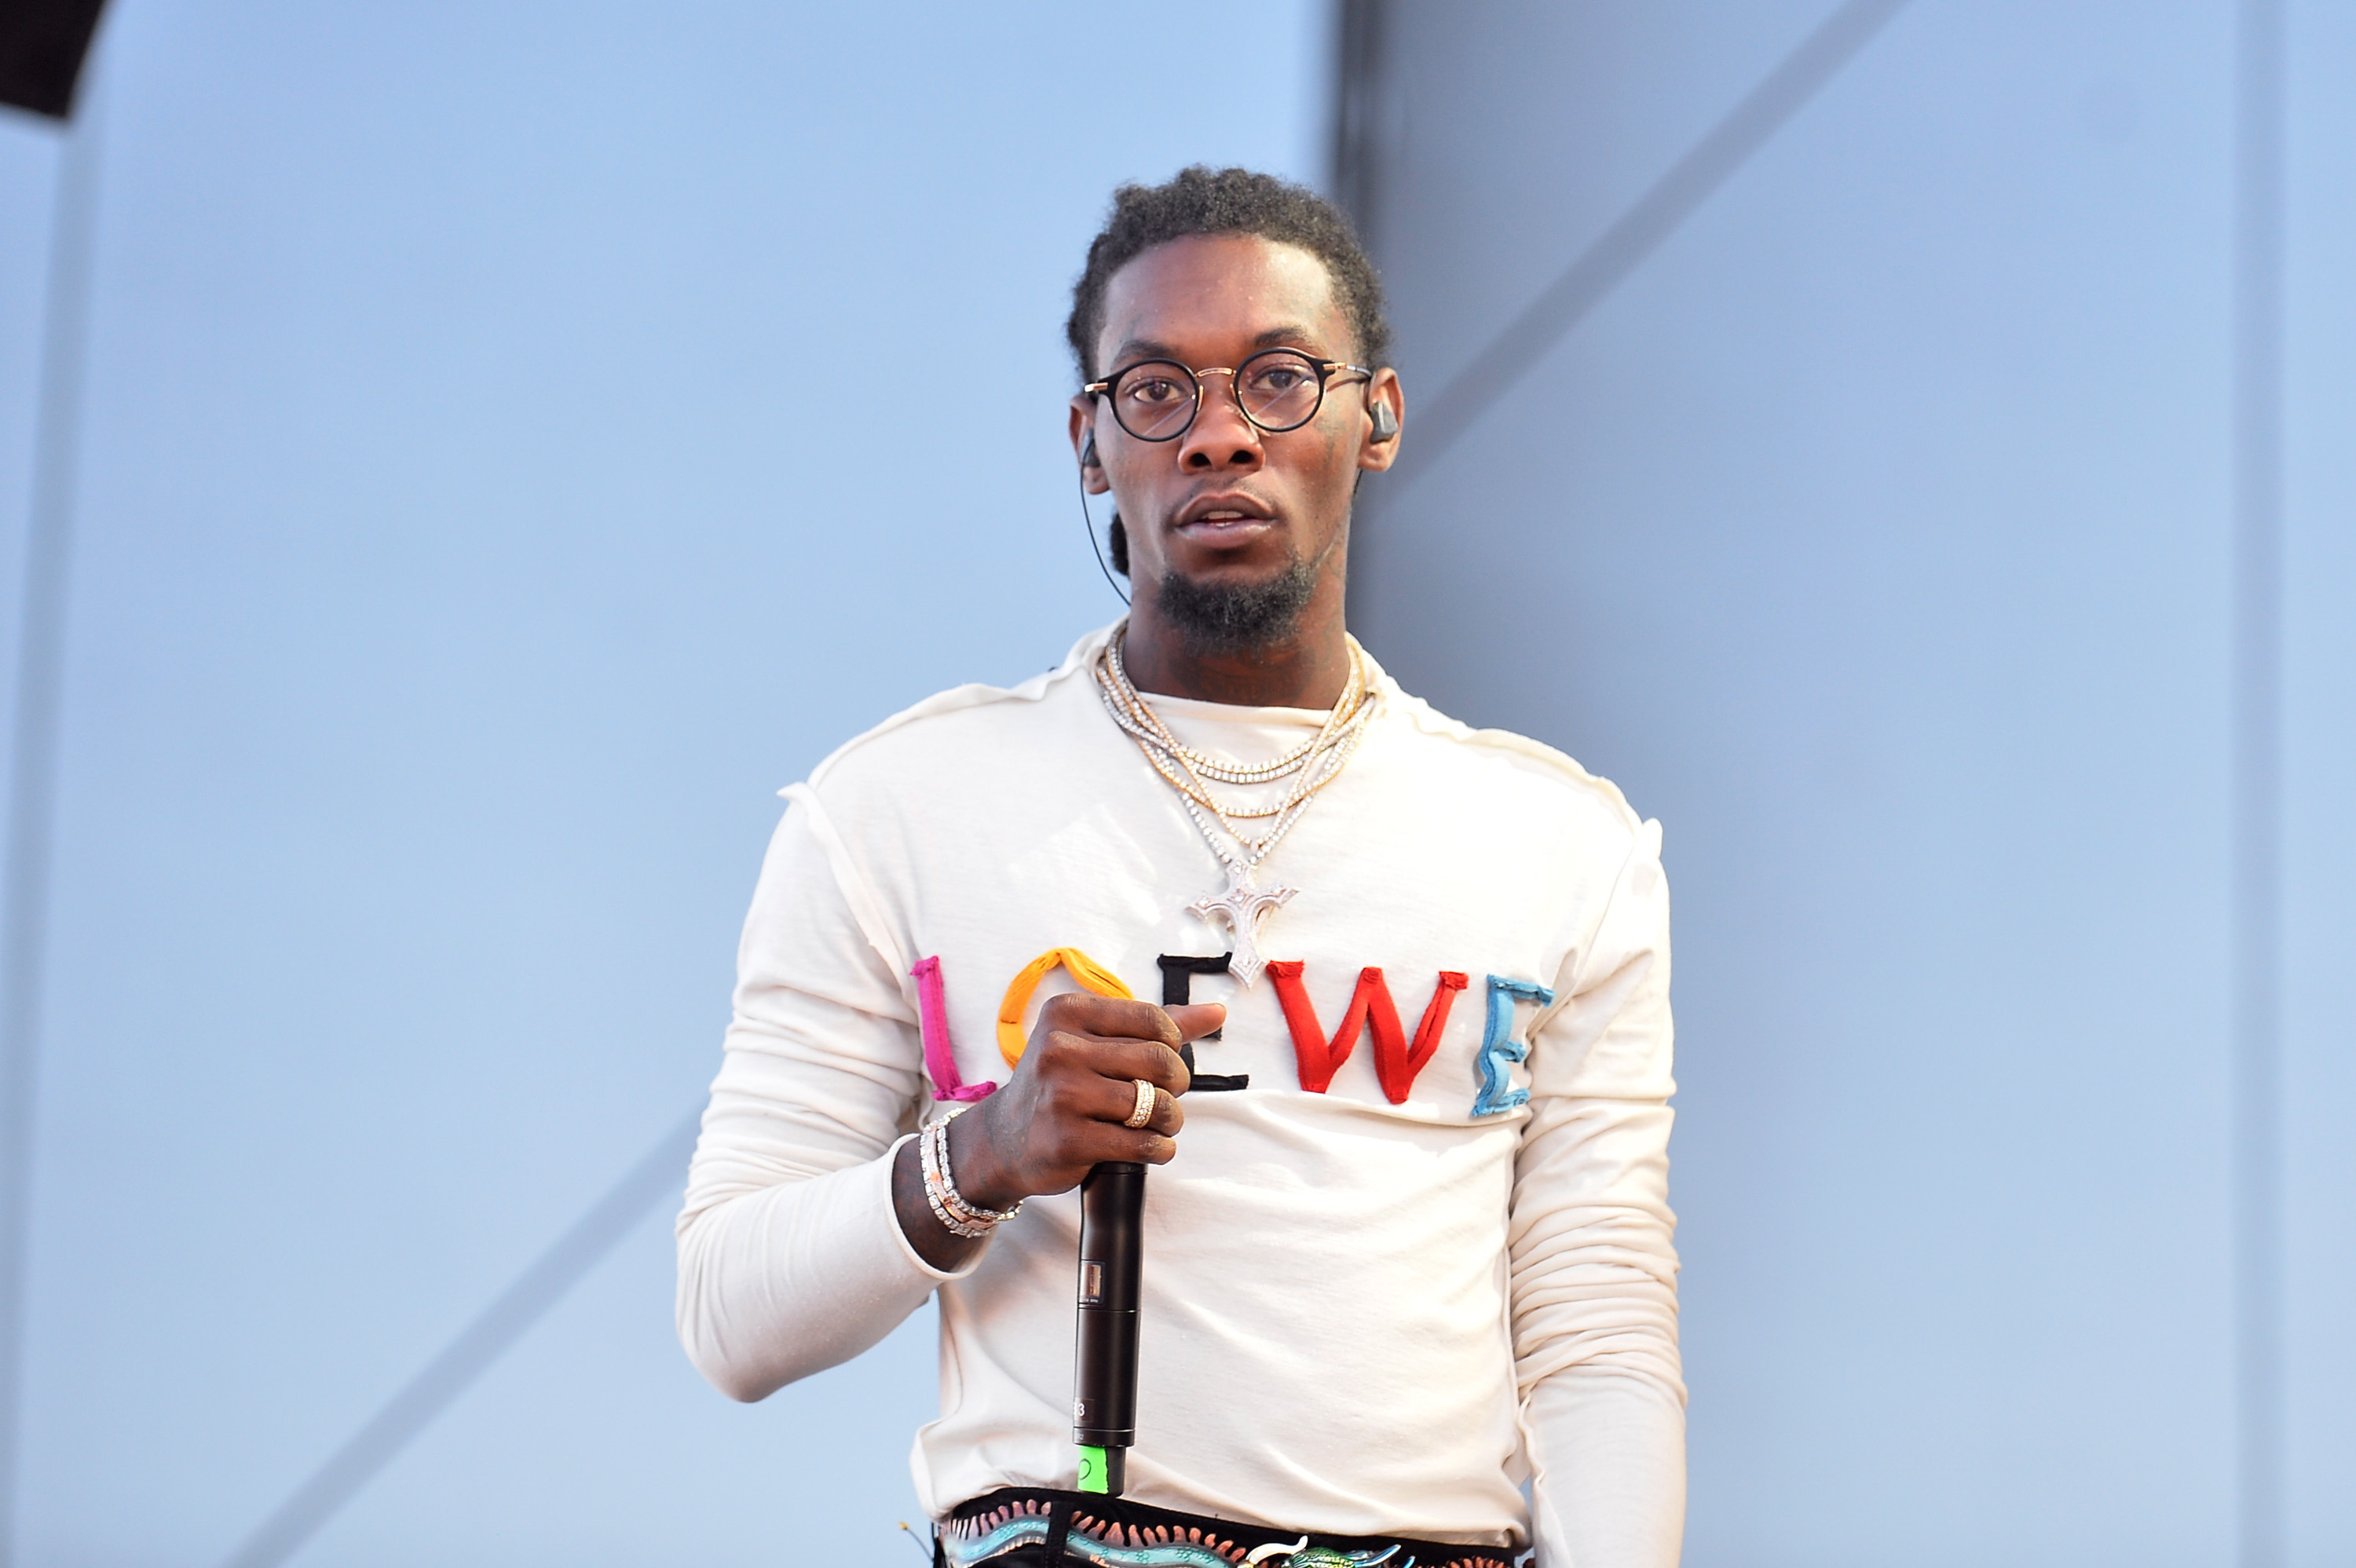 Offset Slams Rumors Of Ric Flair’s Death: “Don’t Wish Death On My Friend”